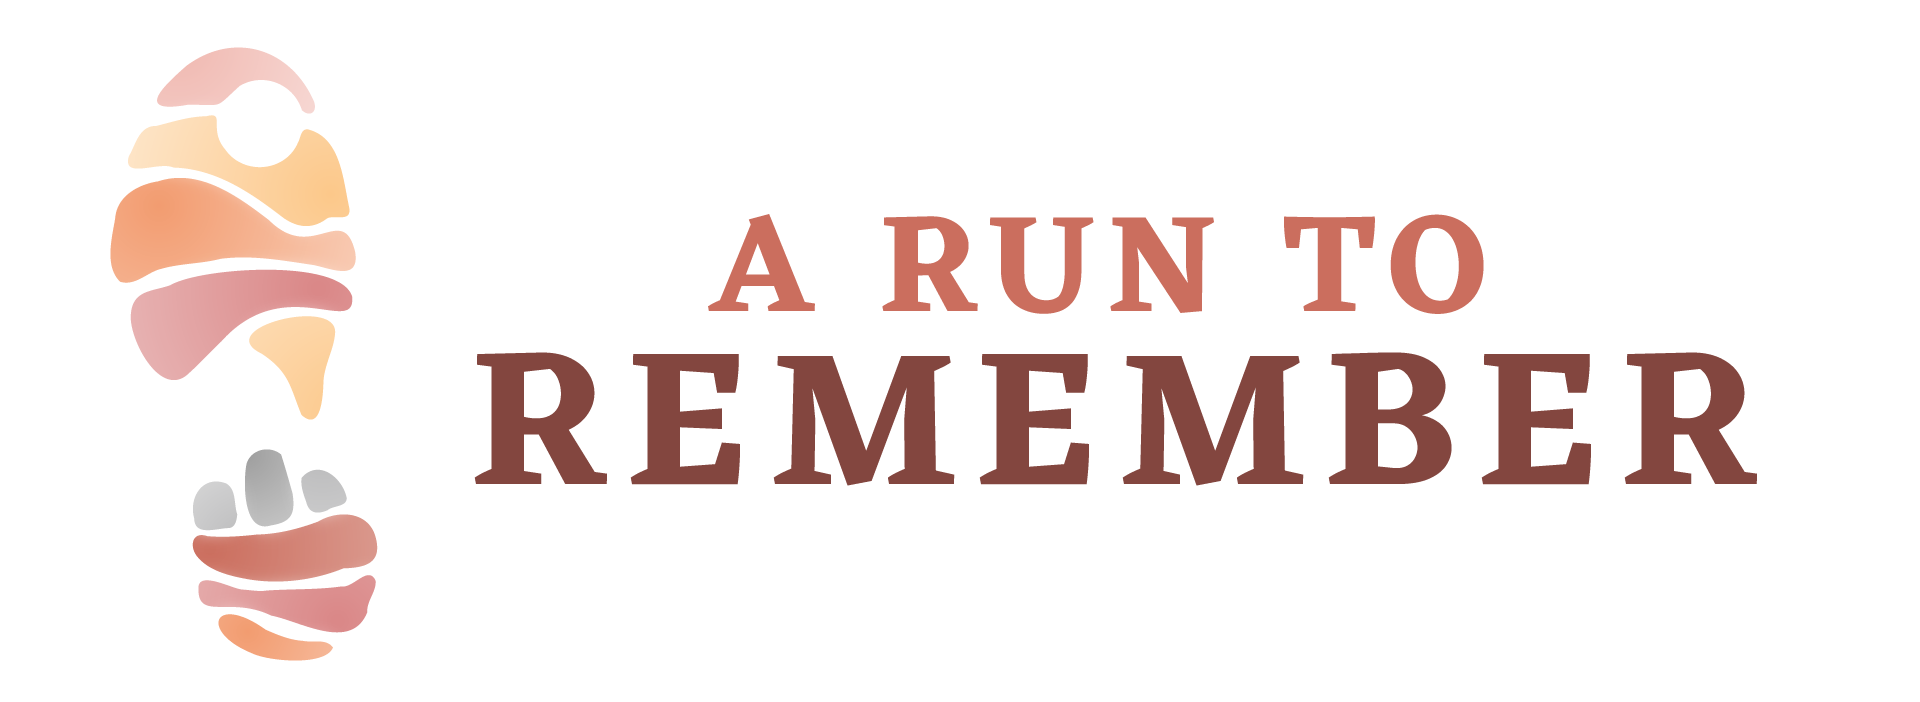 A Run To Remember banner